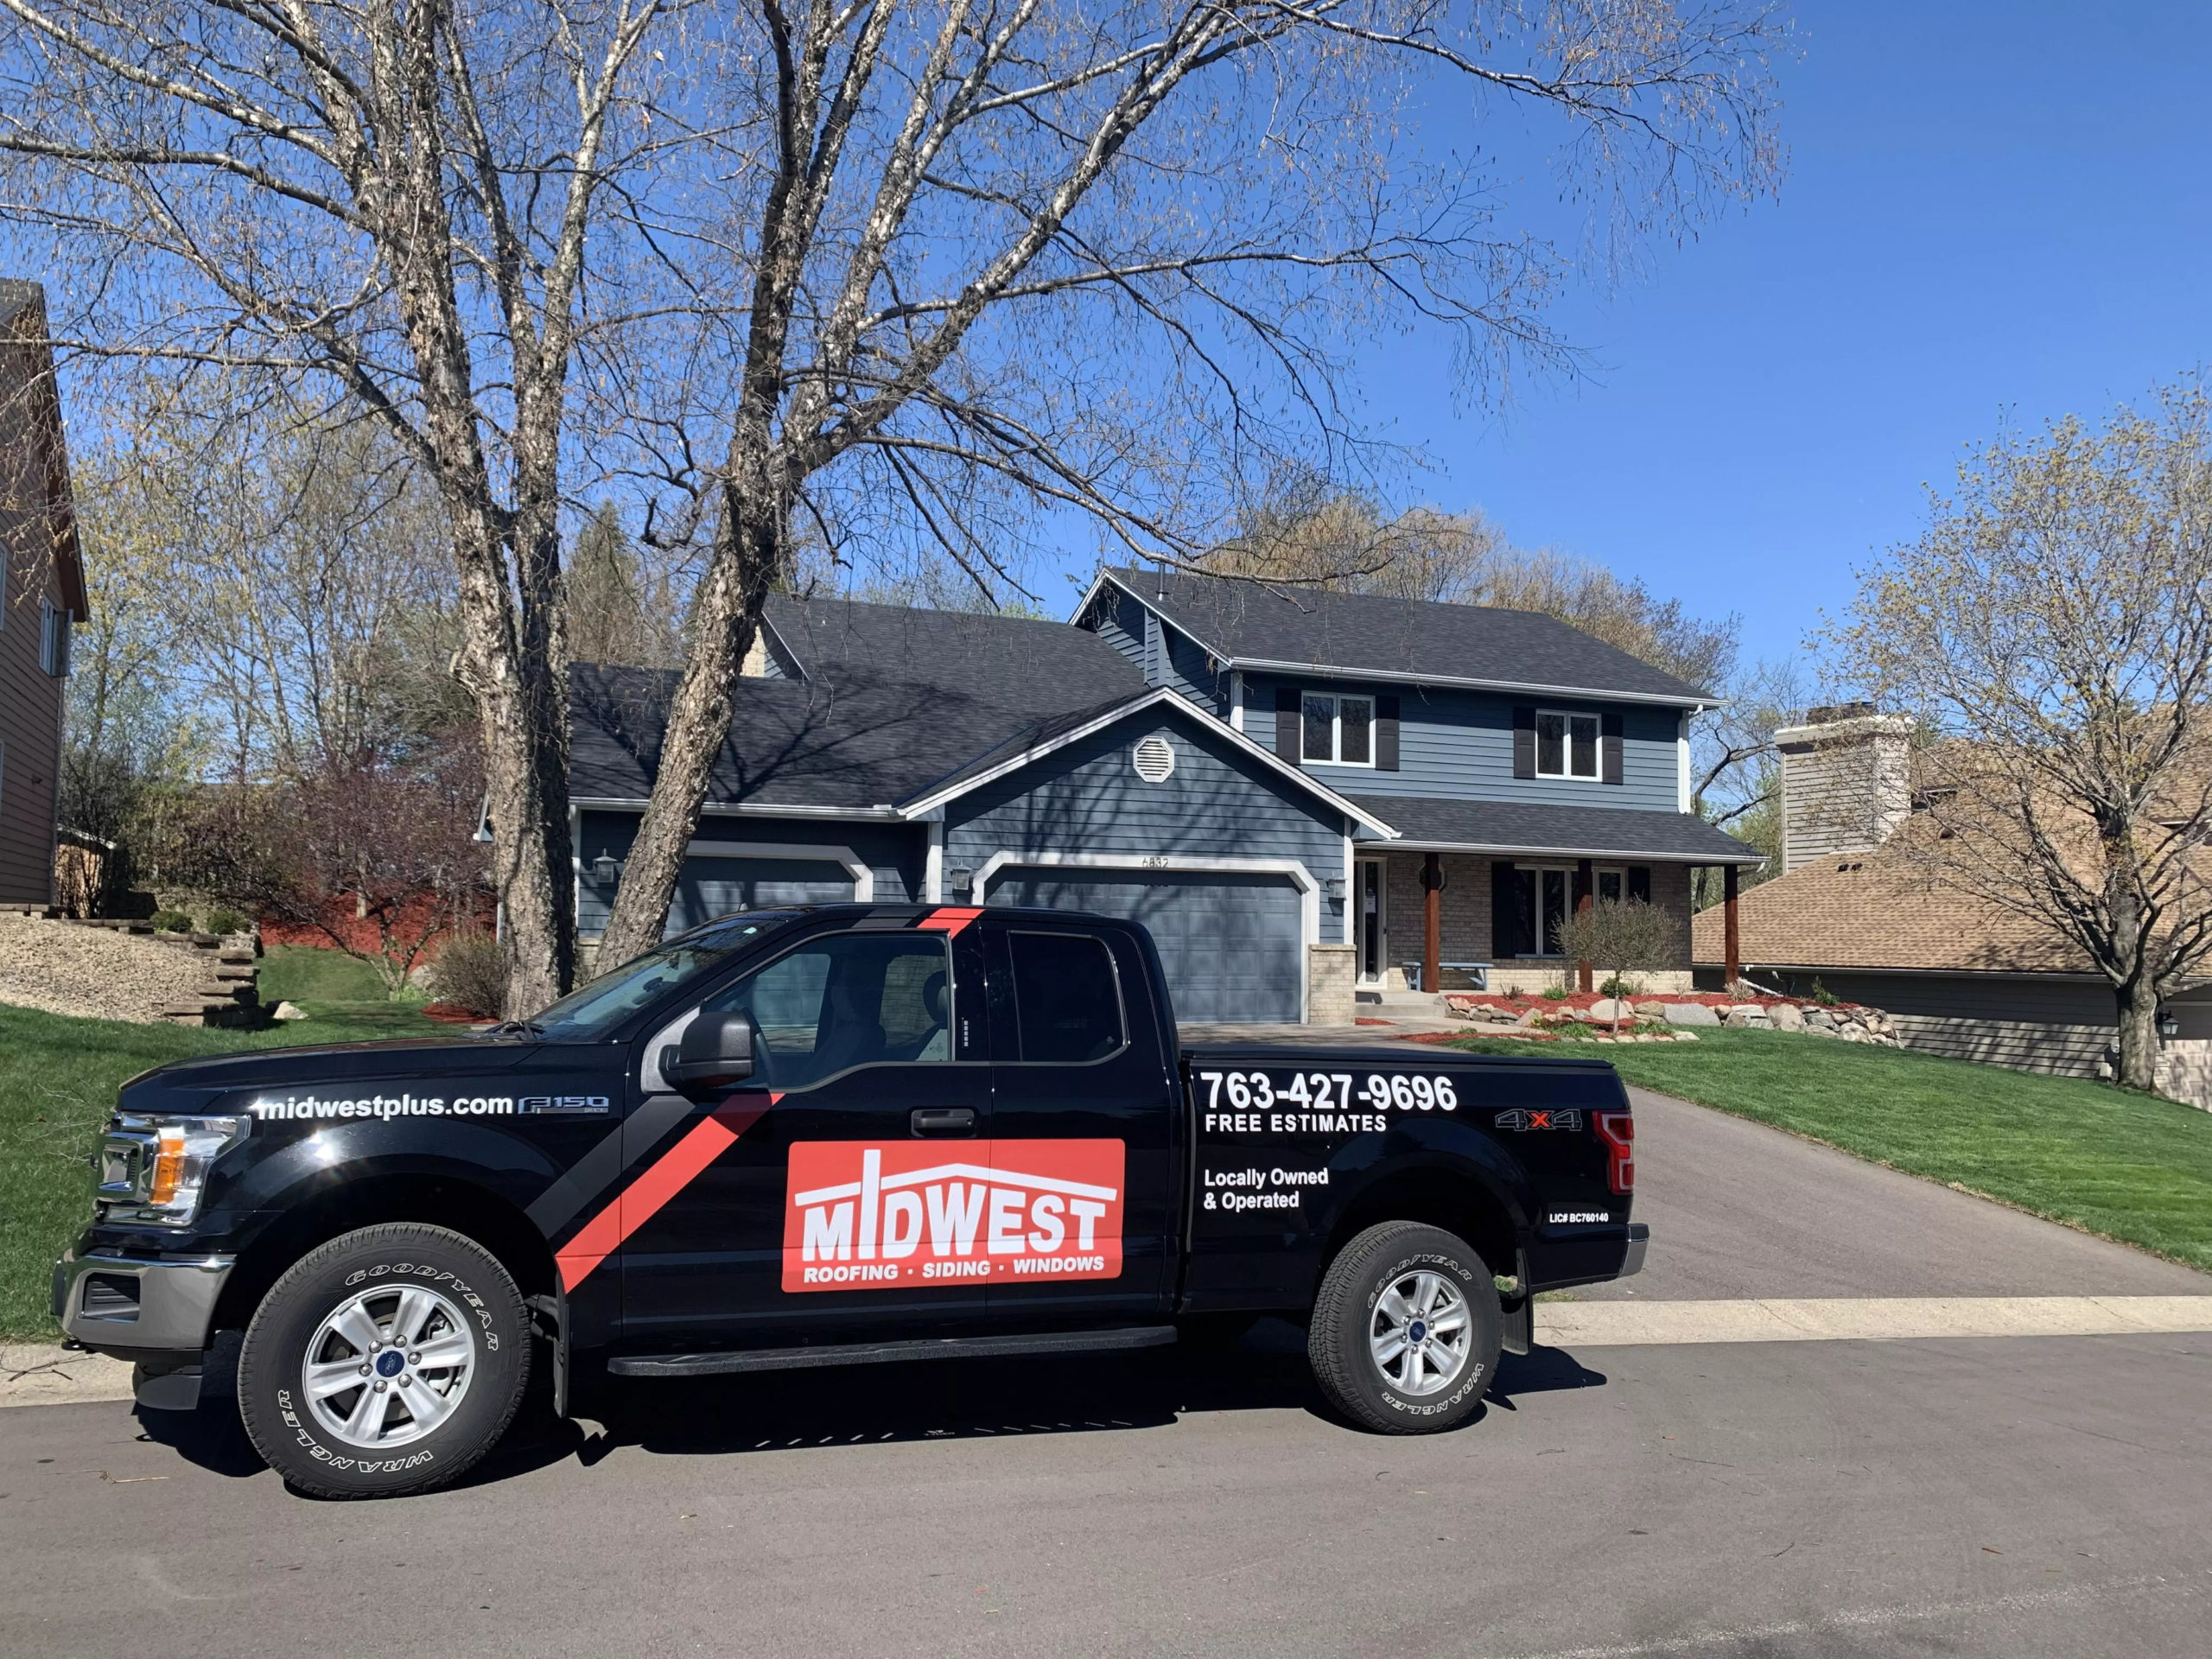 A Midwest Roofing, Siding & Windows service vehicle in front of a home.